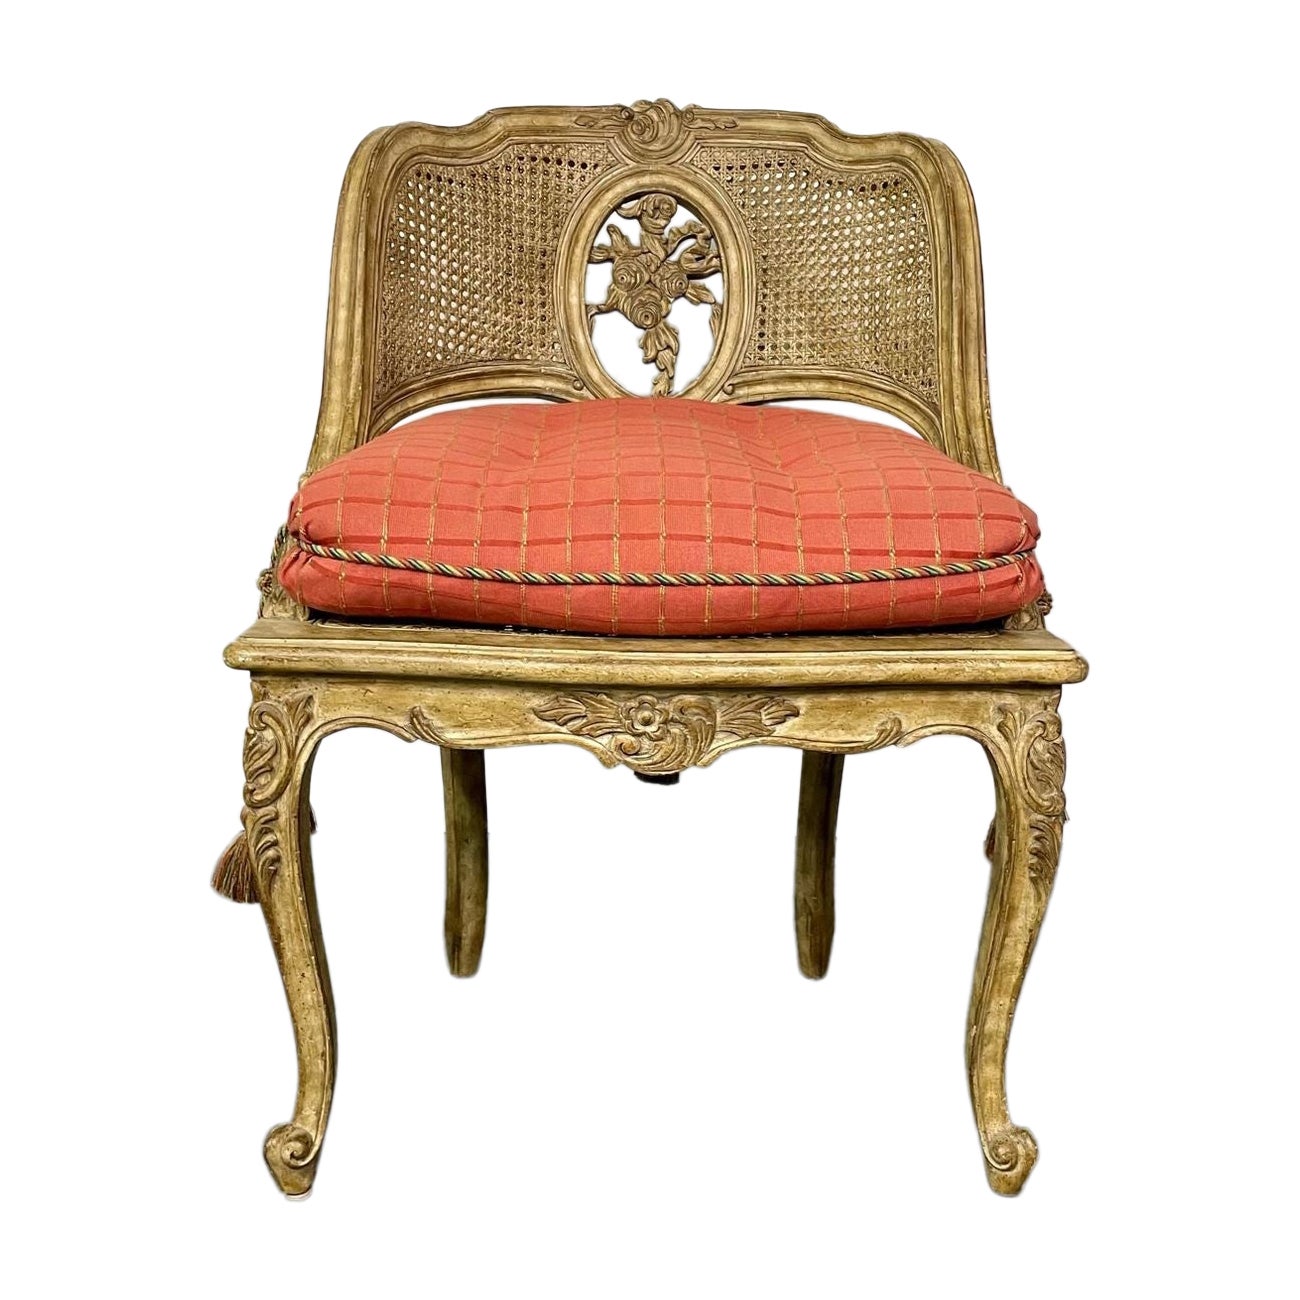 Louis XV Style Boudoir Chair, Vanity or Hall Chair, Tufted Pillow and Tassels